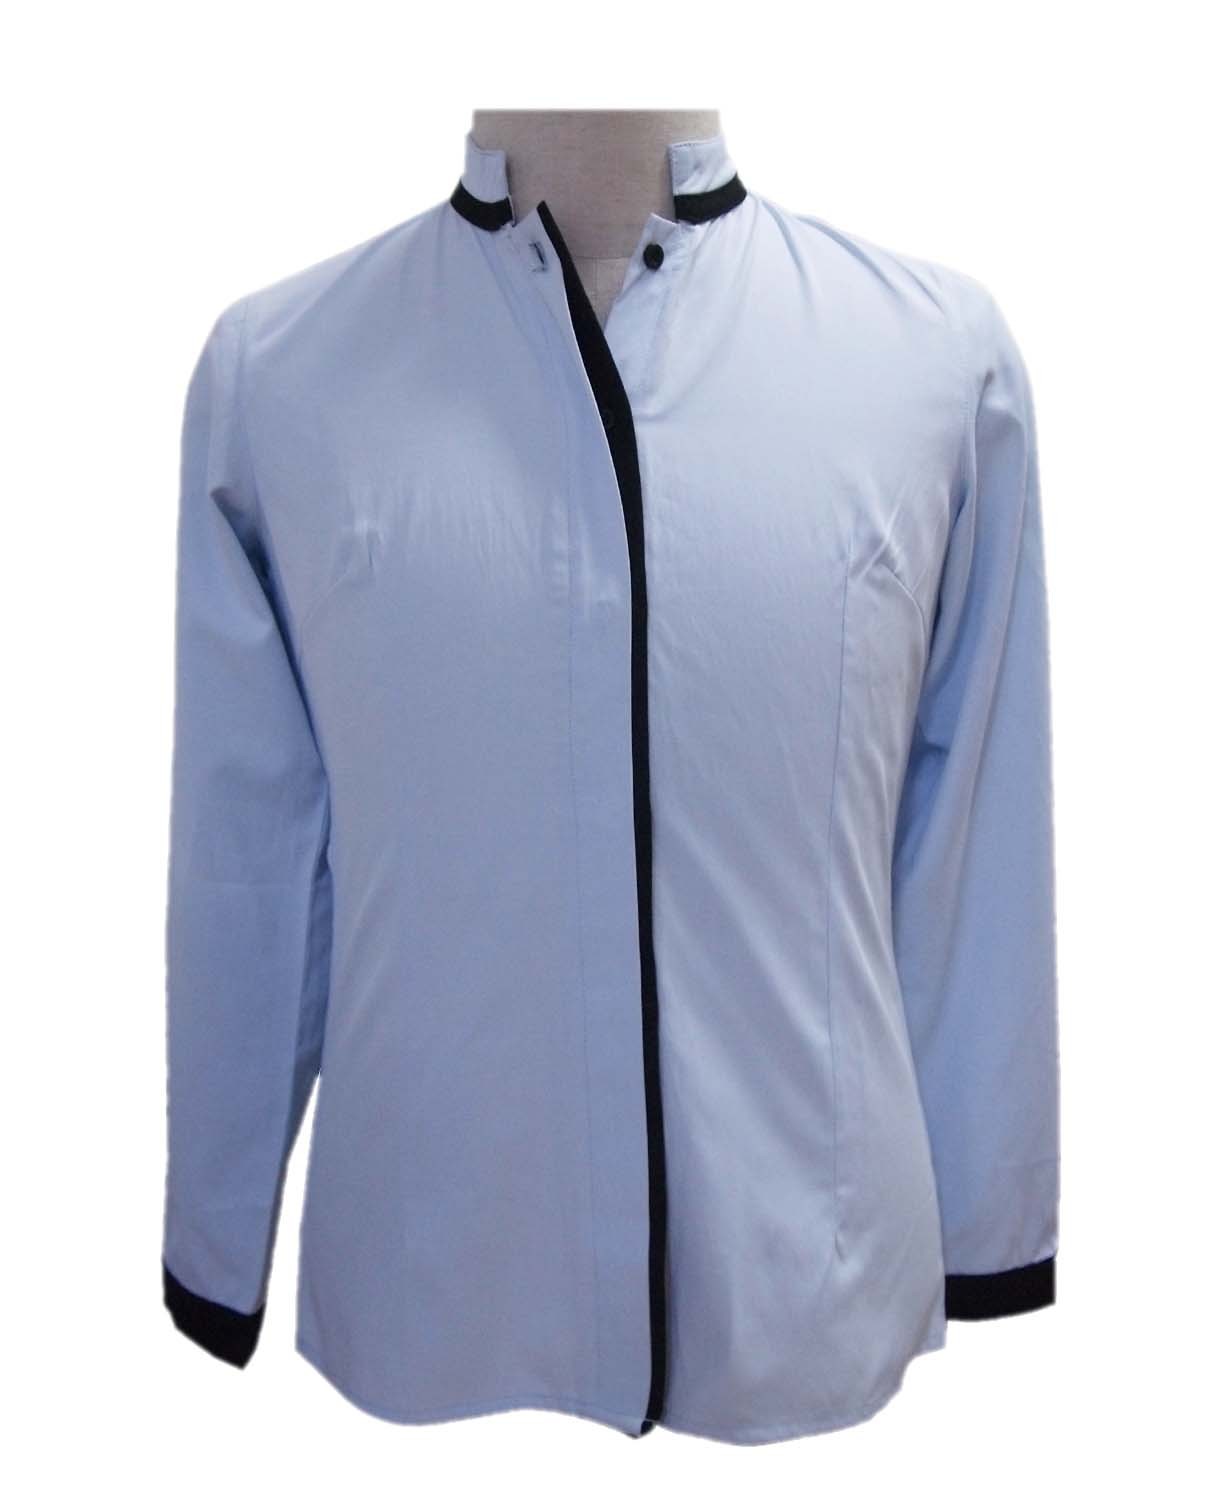 Long Sleeves Shirt for corporate attire. Mandarin collar with black ...